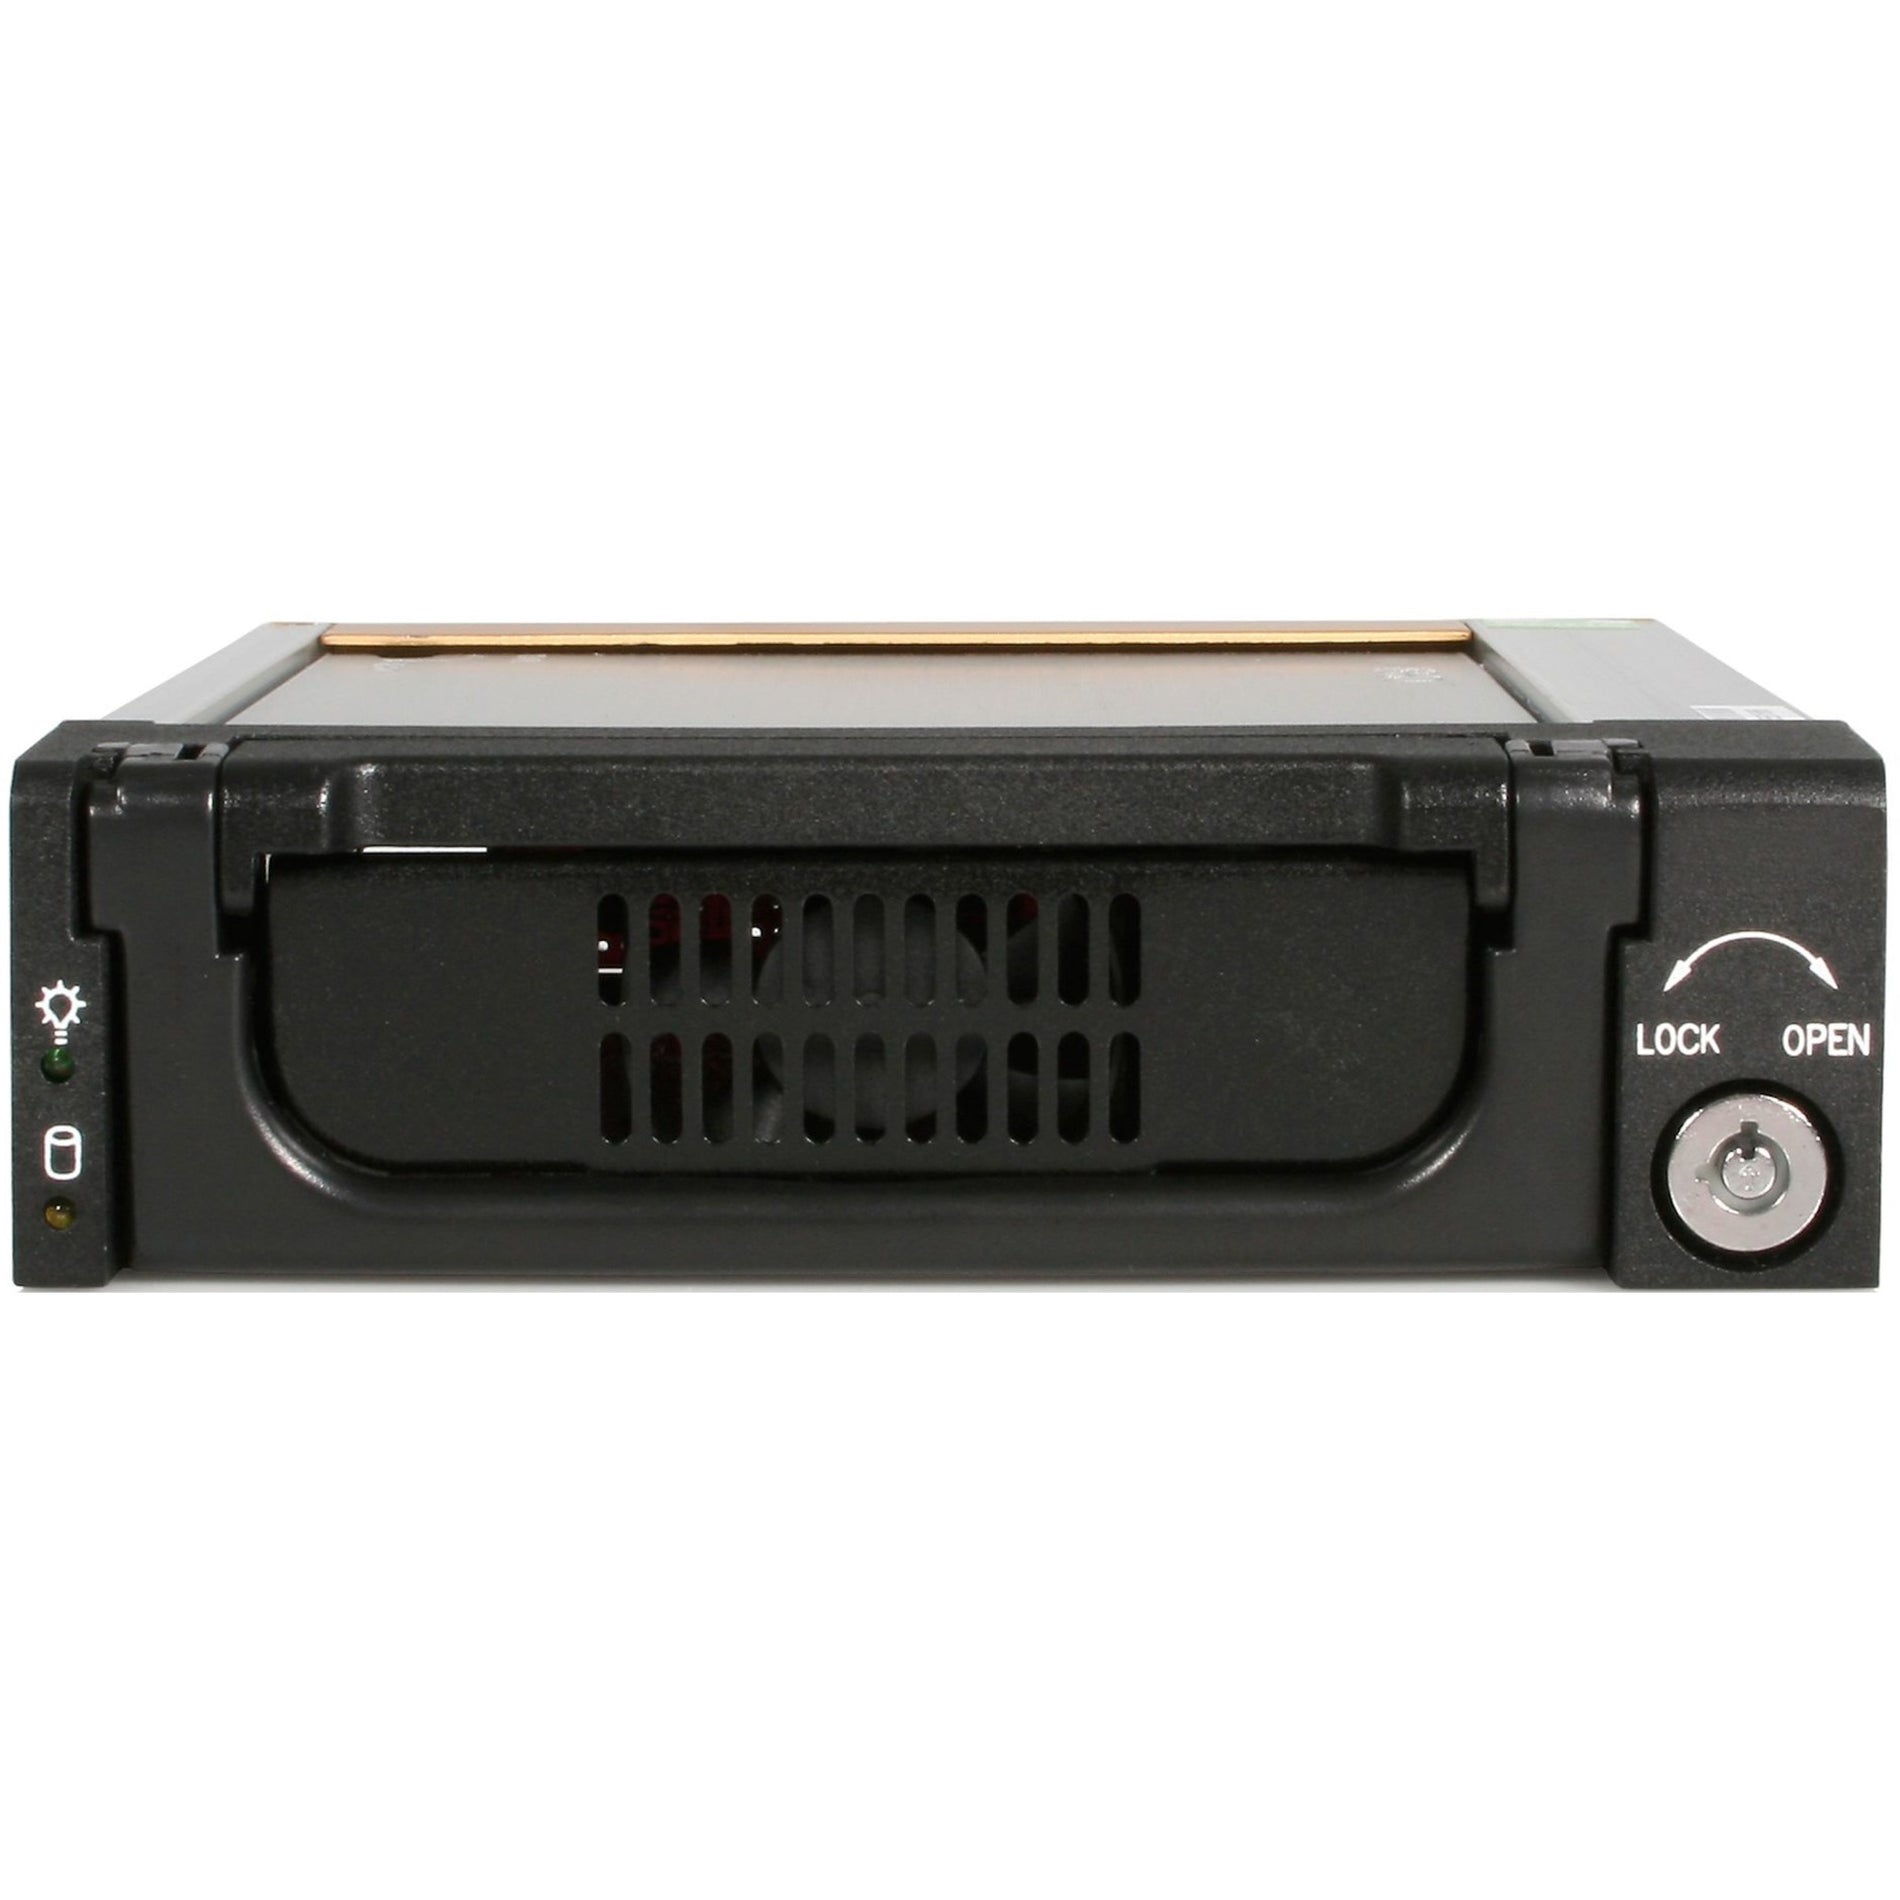 StarTech.com DRW150SATBK 5.25" Rugged SATA HDD Mobile Rack Drawer, Quick and Safe Drive Removal, Aluminum Construction, 2-Year Warranty